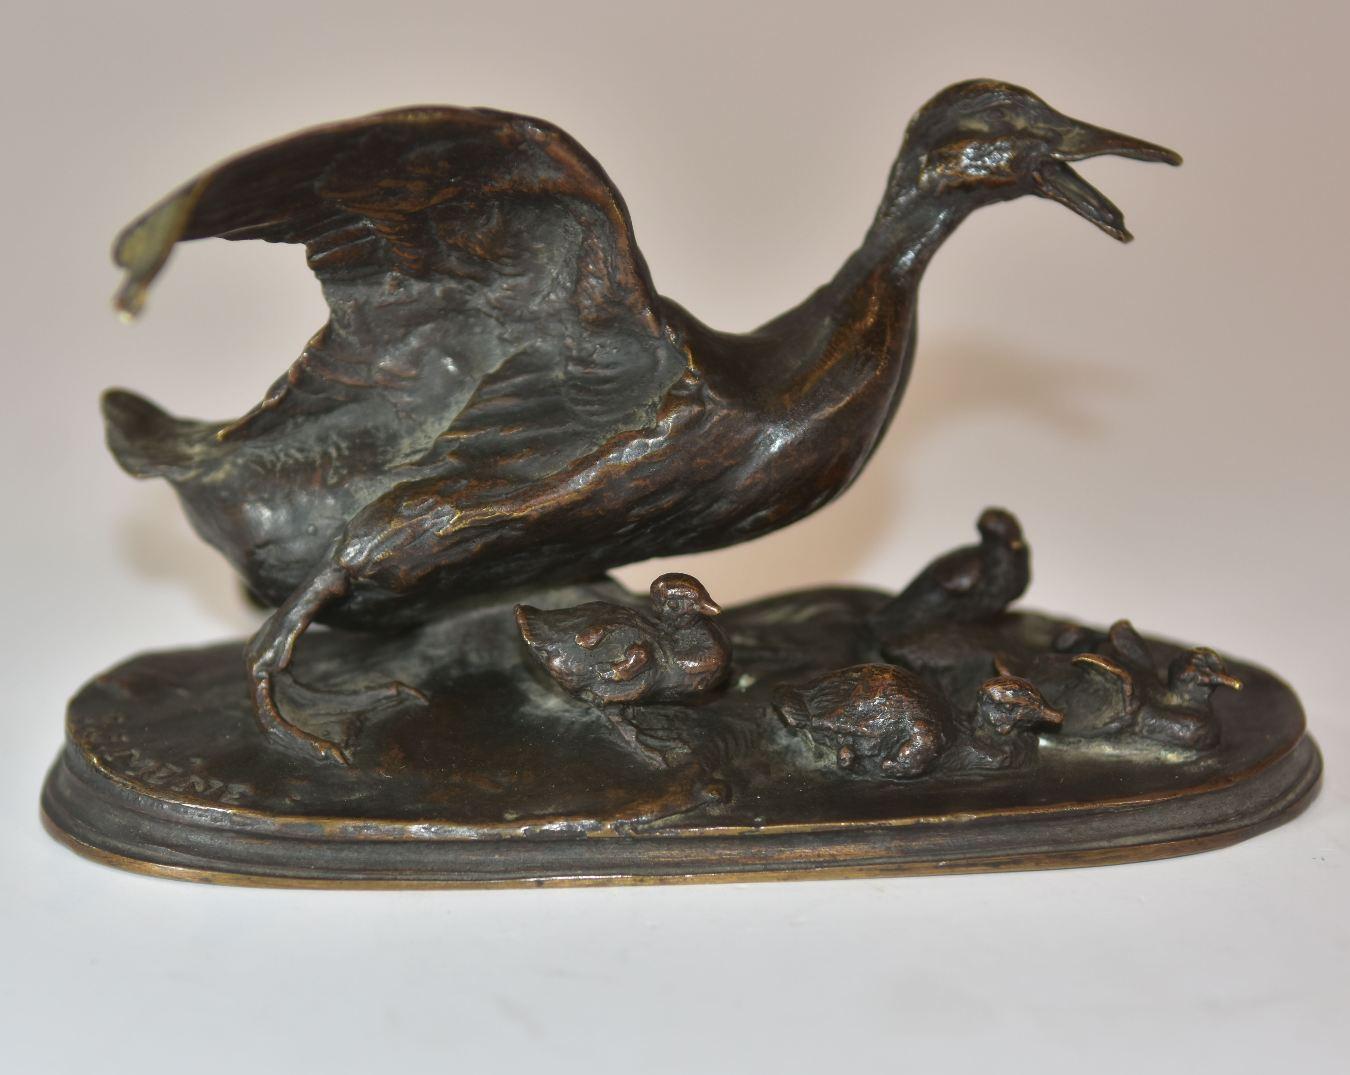 19th century cane with its 6 animal bronze ducklings by P.J Mêne. Brown patina. Number 33 on the terrace.